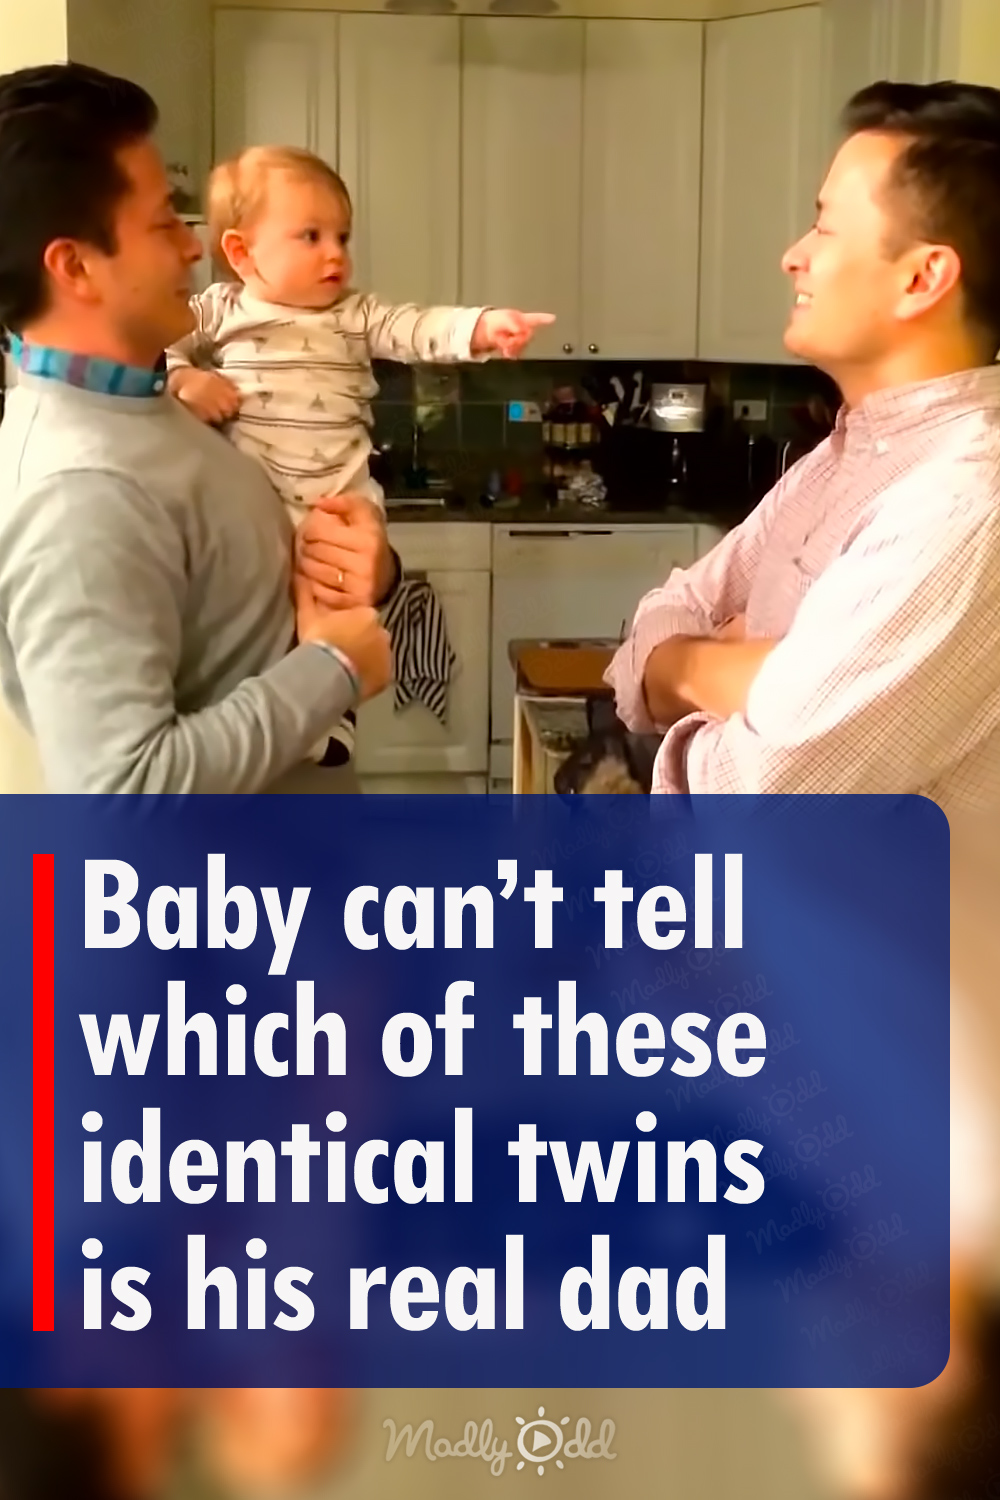 Baby can’t tell which of these identical twins is his real dad